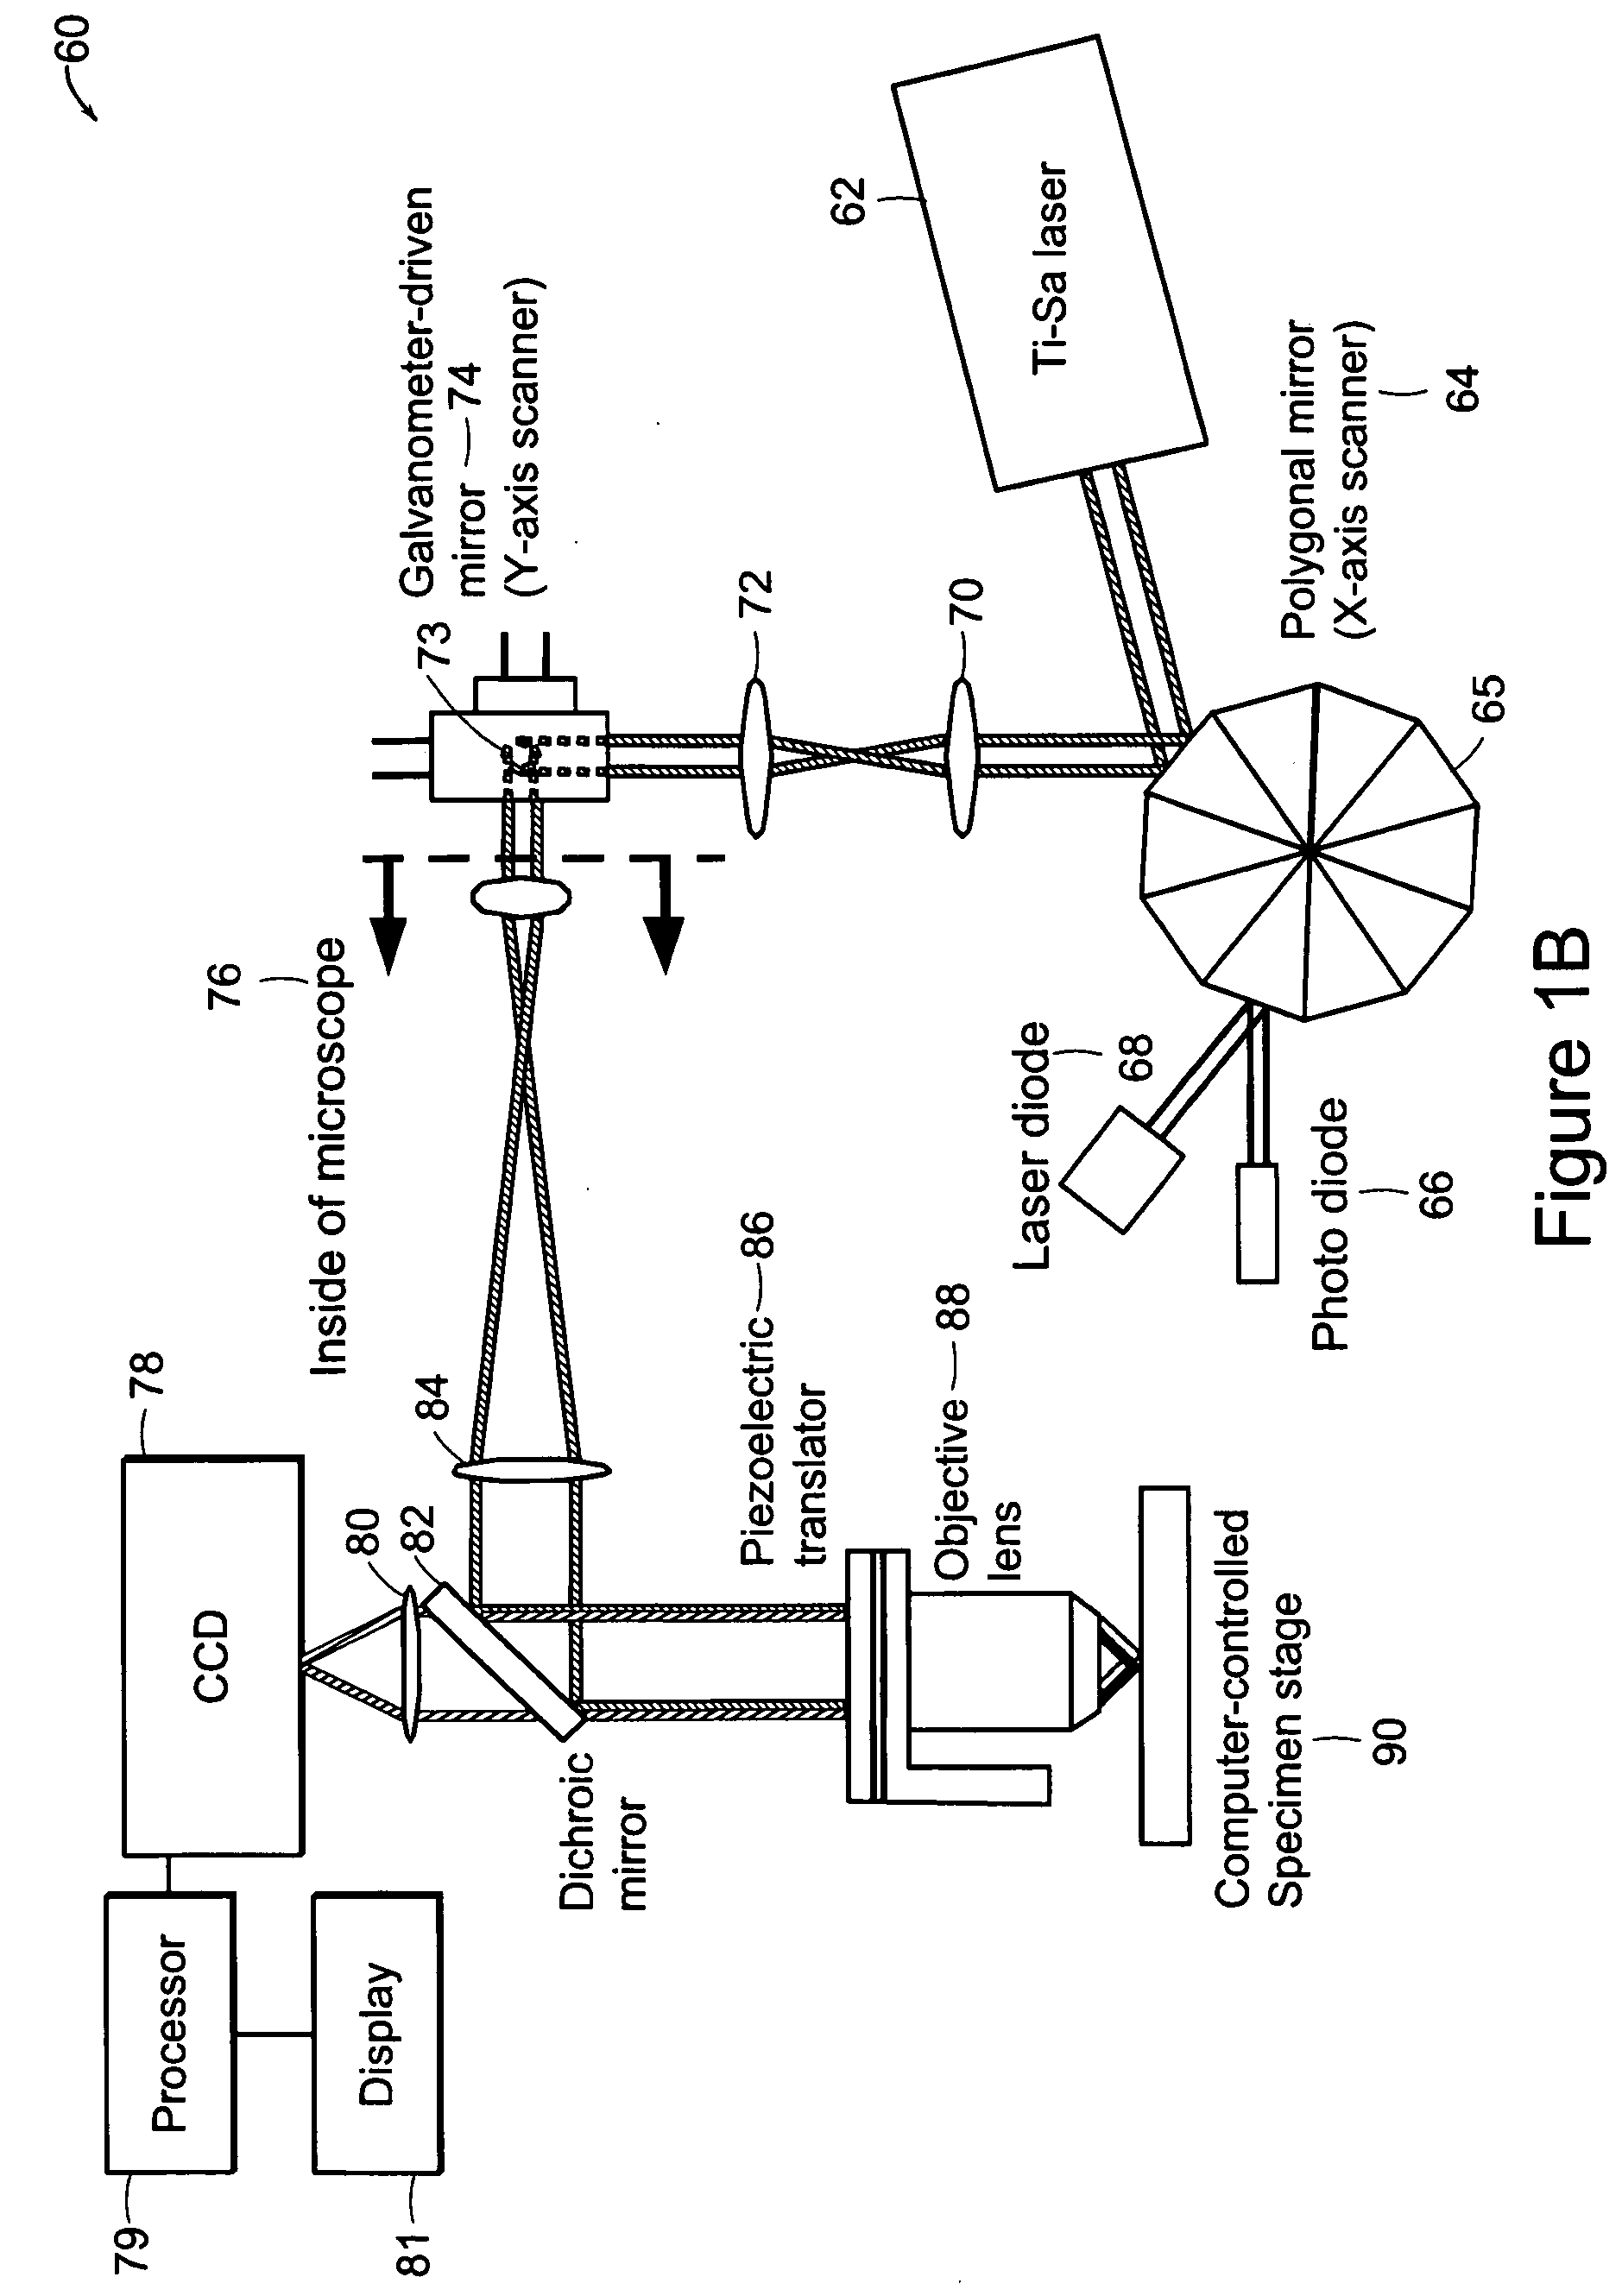 Systems and methods for volumetric tissue scanning microscopy